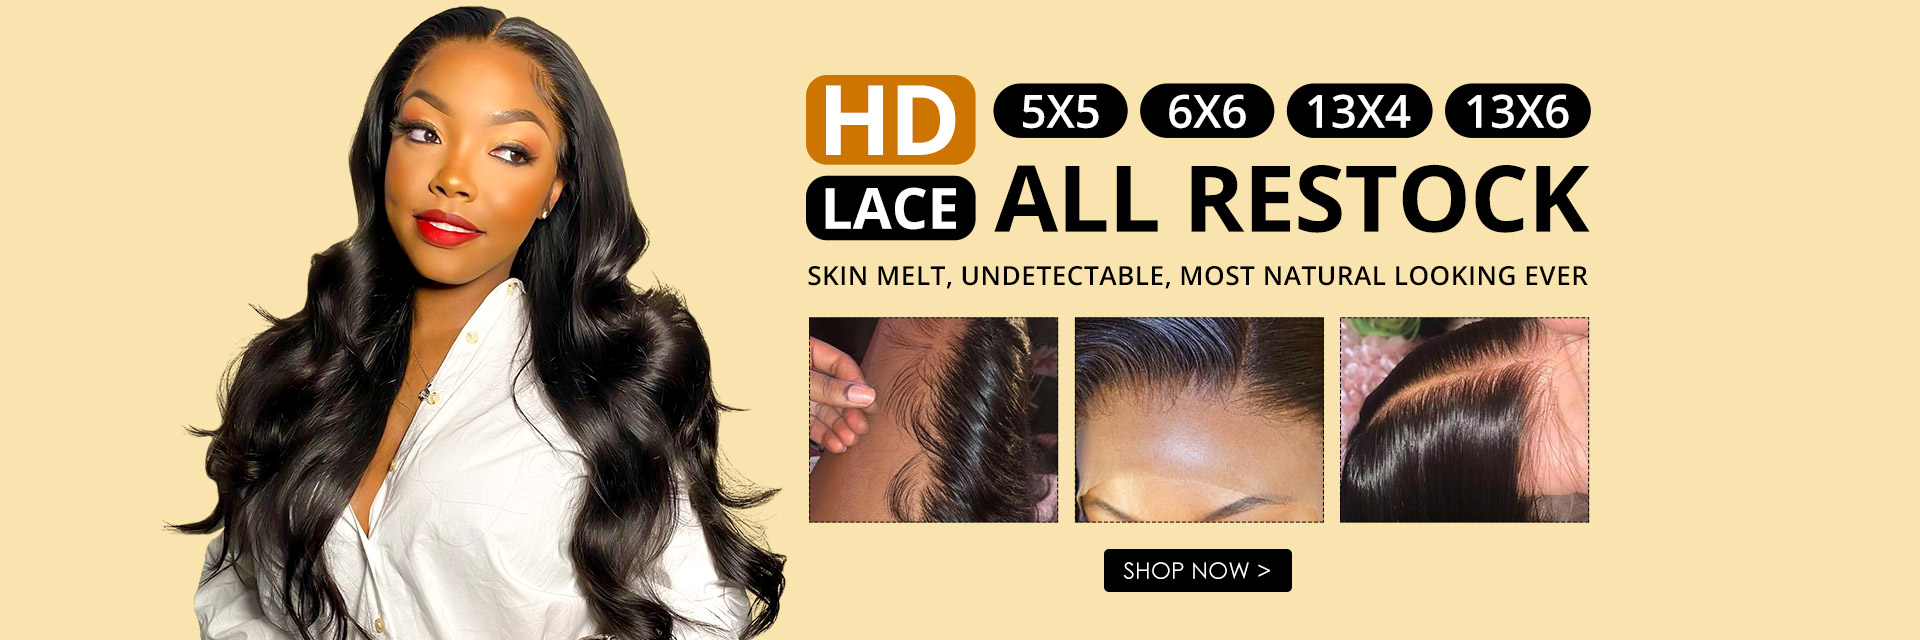 How to make an HD lace closure wig look like a frontal?